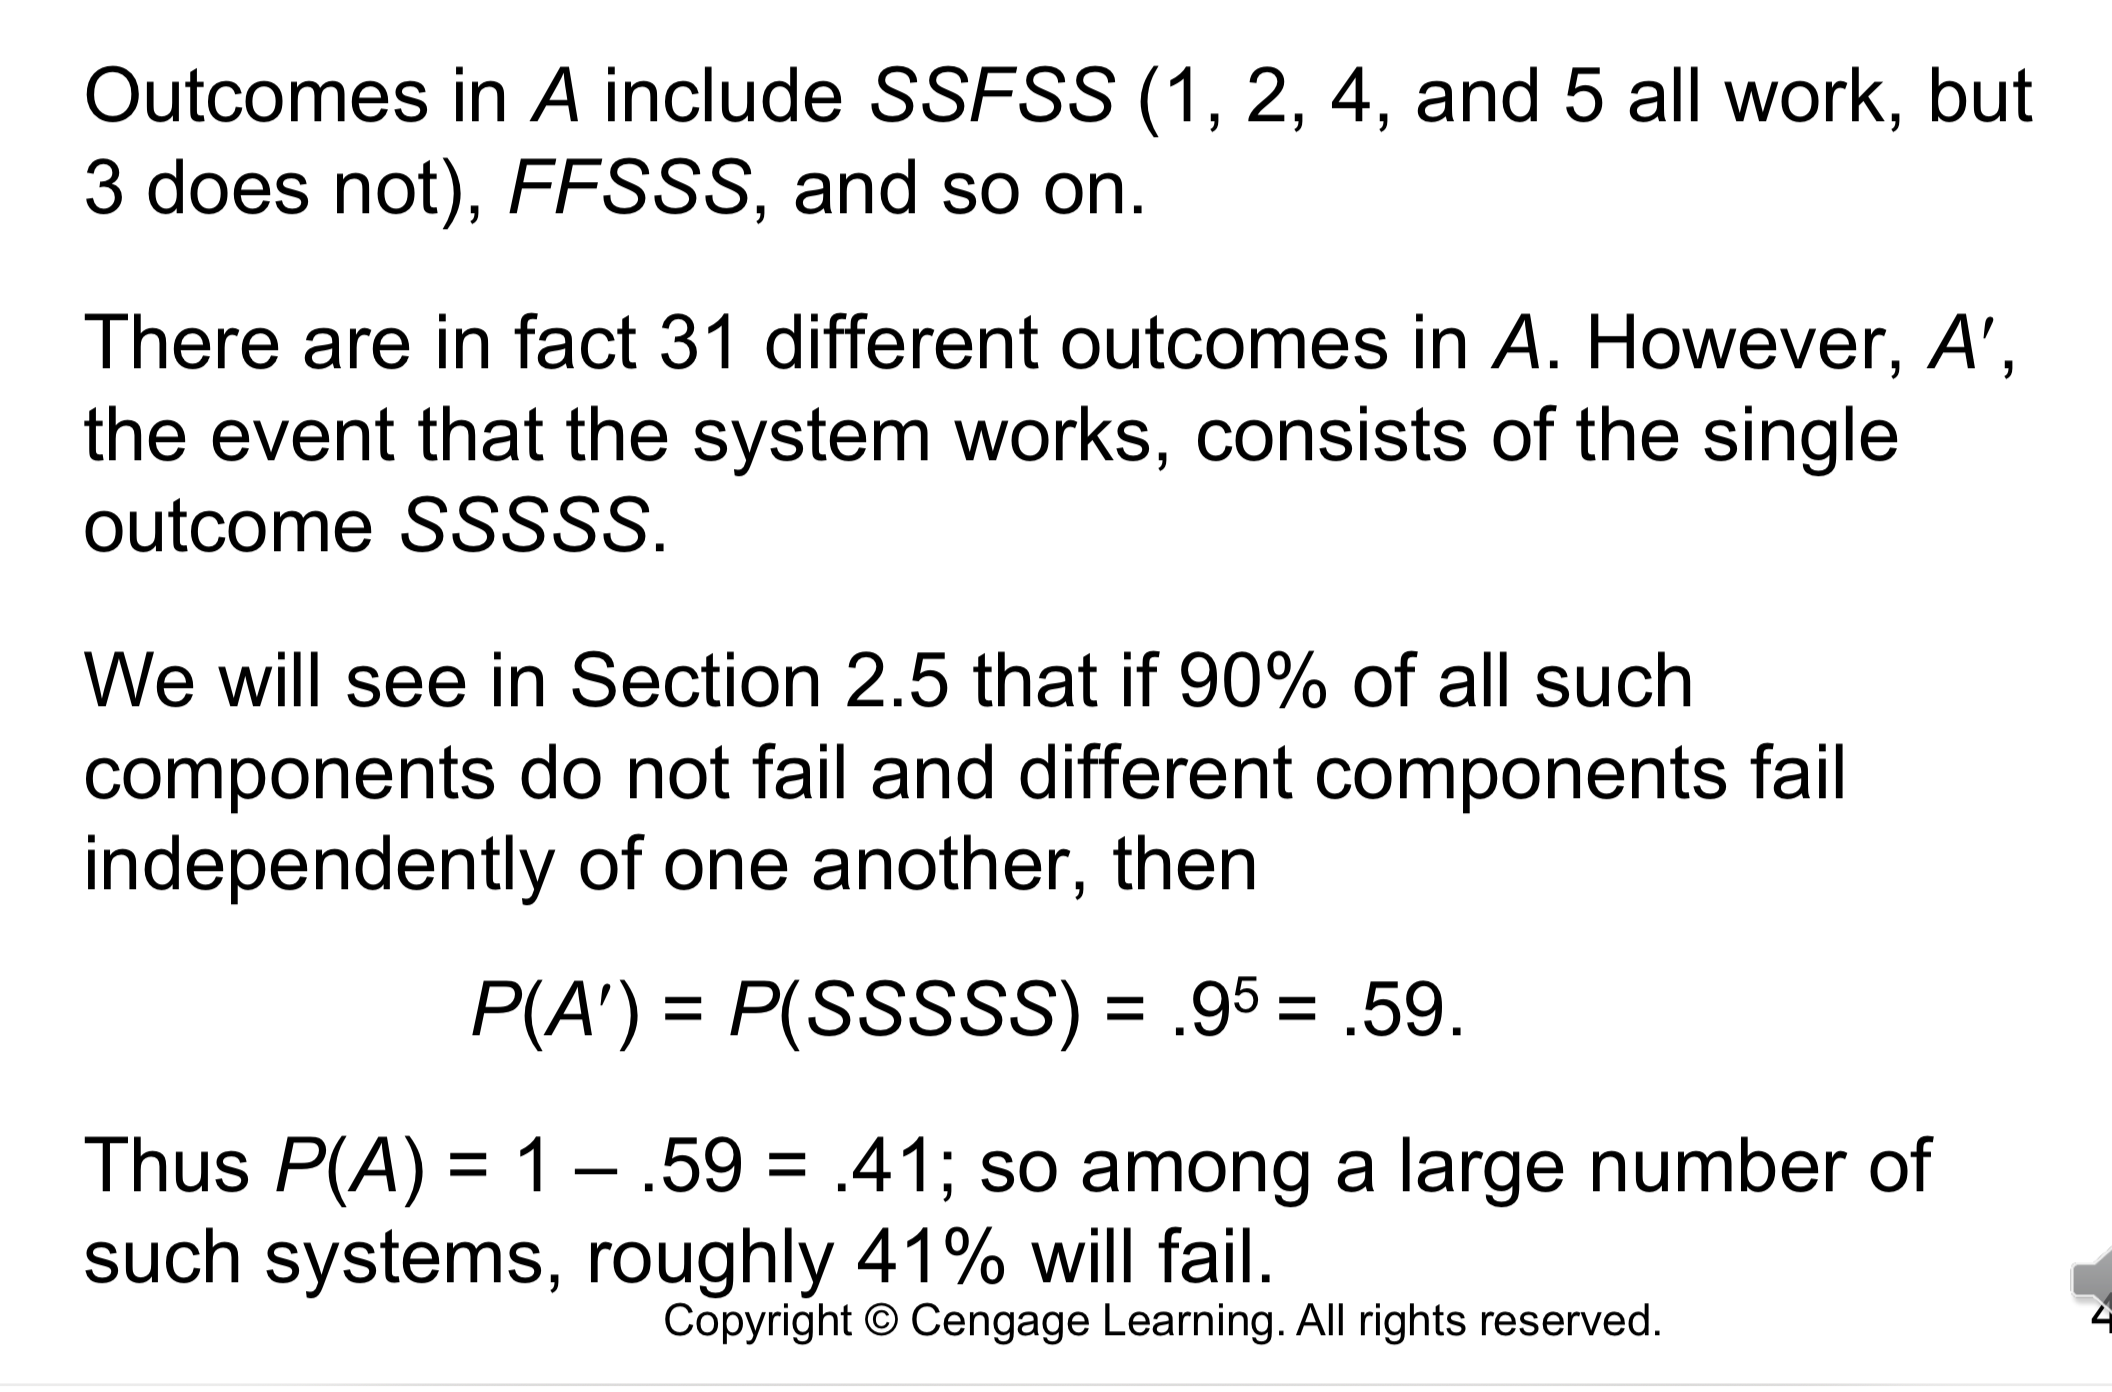 Outcomes in A include SSFSS (1, 2, 4, and 5 all work, but
3 does not), FFSSS, and so on.
There are in fact 31 different outcomes in A. However, A',
the event that the system works, consists of the single
outcome SSSSS
We will see in Section 2.5 that if 90% of all such
components do not fail and different components fail
independently of one another, then
P(A') P(SSSSS) .95 = 59.
Thus P(A) 1 - .59 = .41; so among a large number of
such systems, roughly 41% will fail
Copyright O Cengage Learning. All rights reserved
